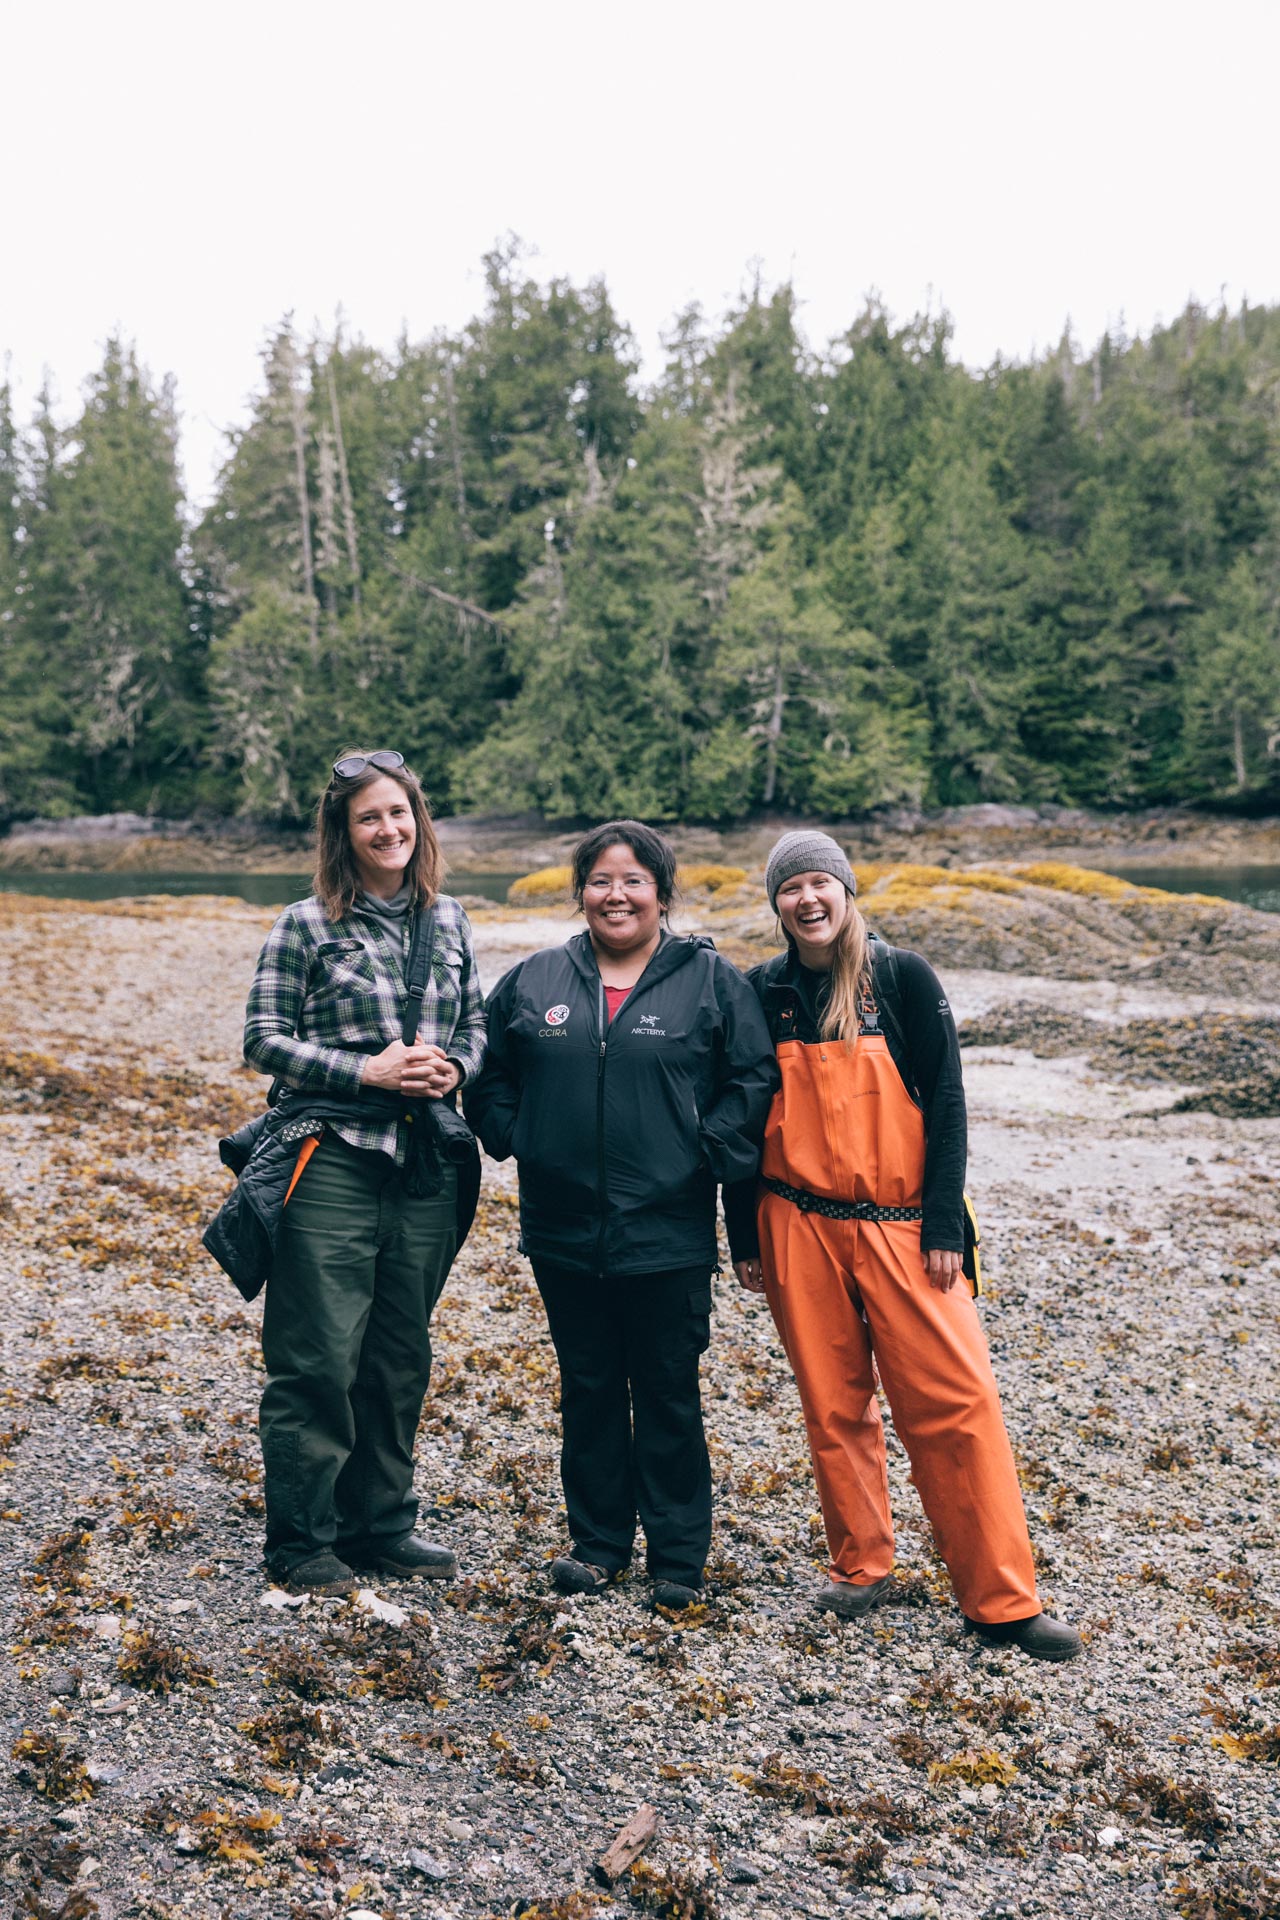 University of Victoria researcher Megan S. Adams (right), Wuikinuxv Nation researcher Jennifer Walkus (center), and Raincoast Conservation researcher Scott Rogers (left) on site in the Great Bear Rainforest of the Coastal First Nations and British Columbia, Canada. (Photo courtesy of Jeremy Koreski/The Sea to Cedar Initiative; reprinted with permission)